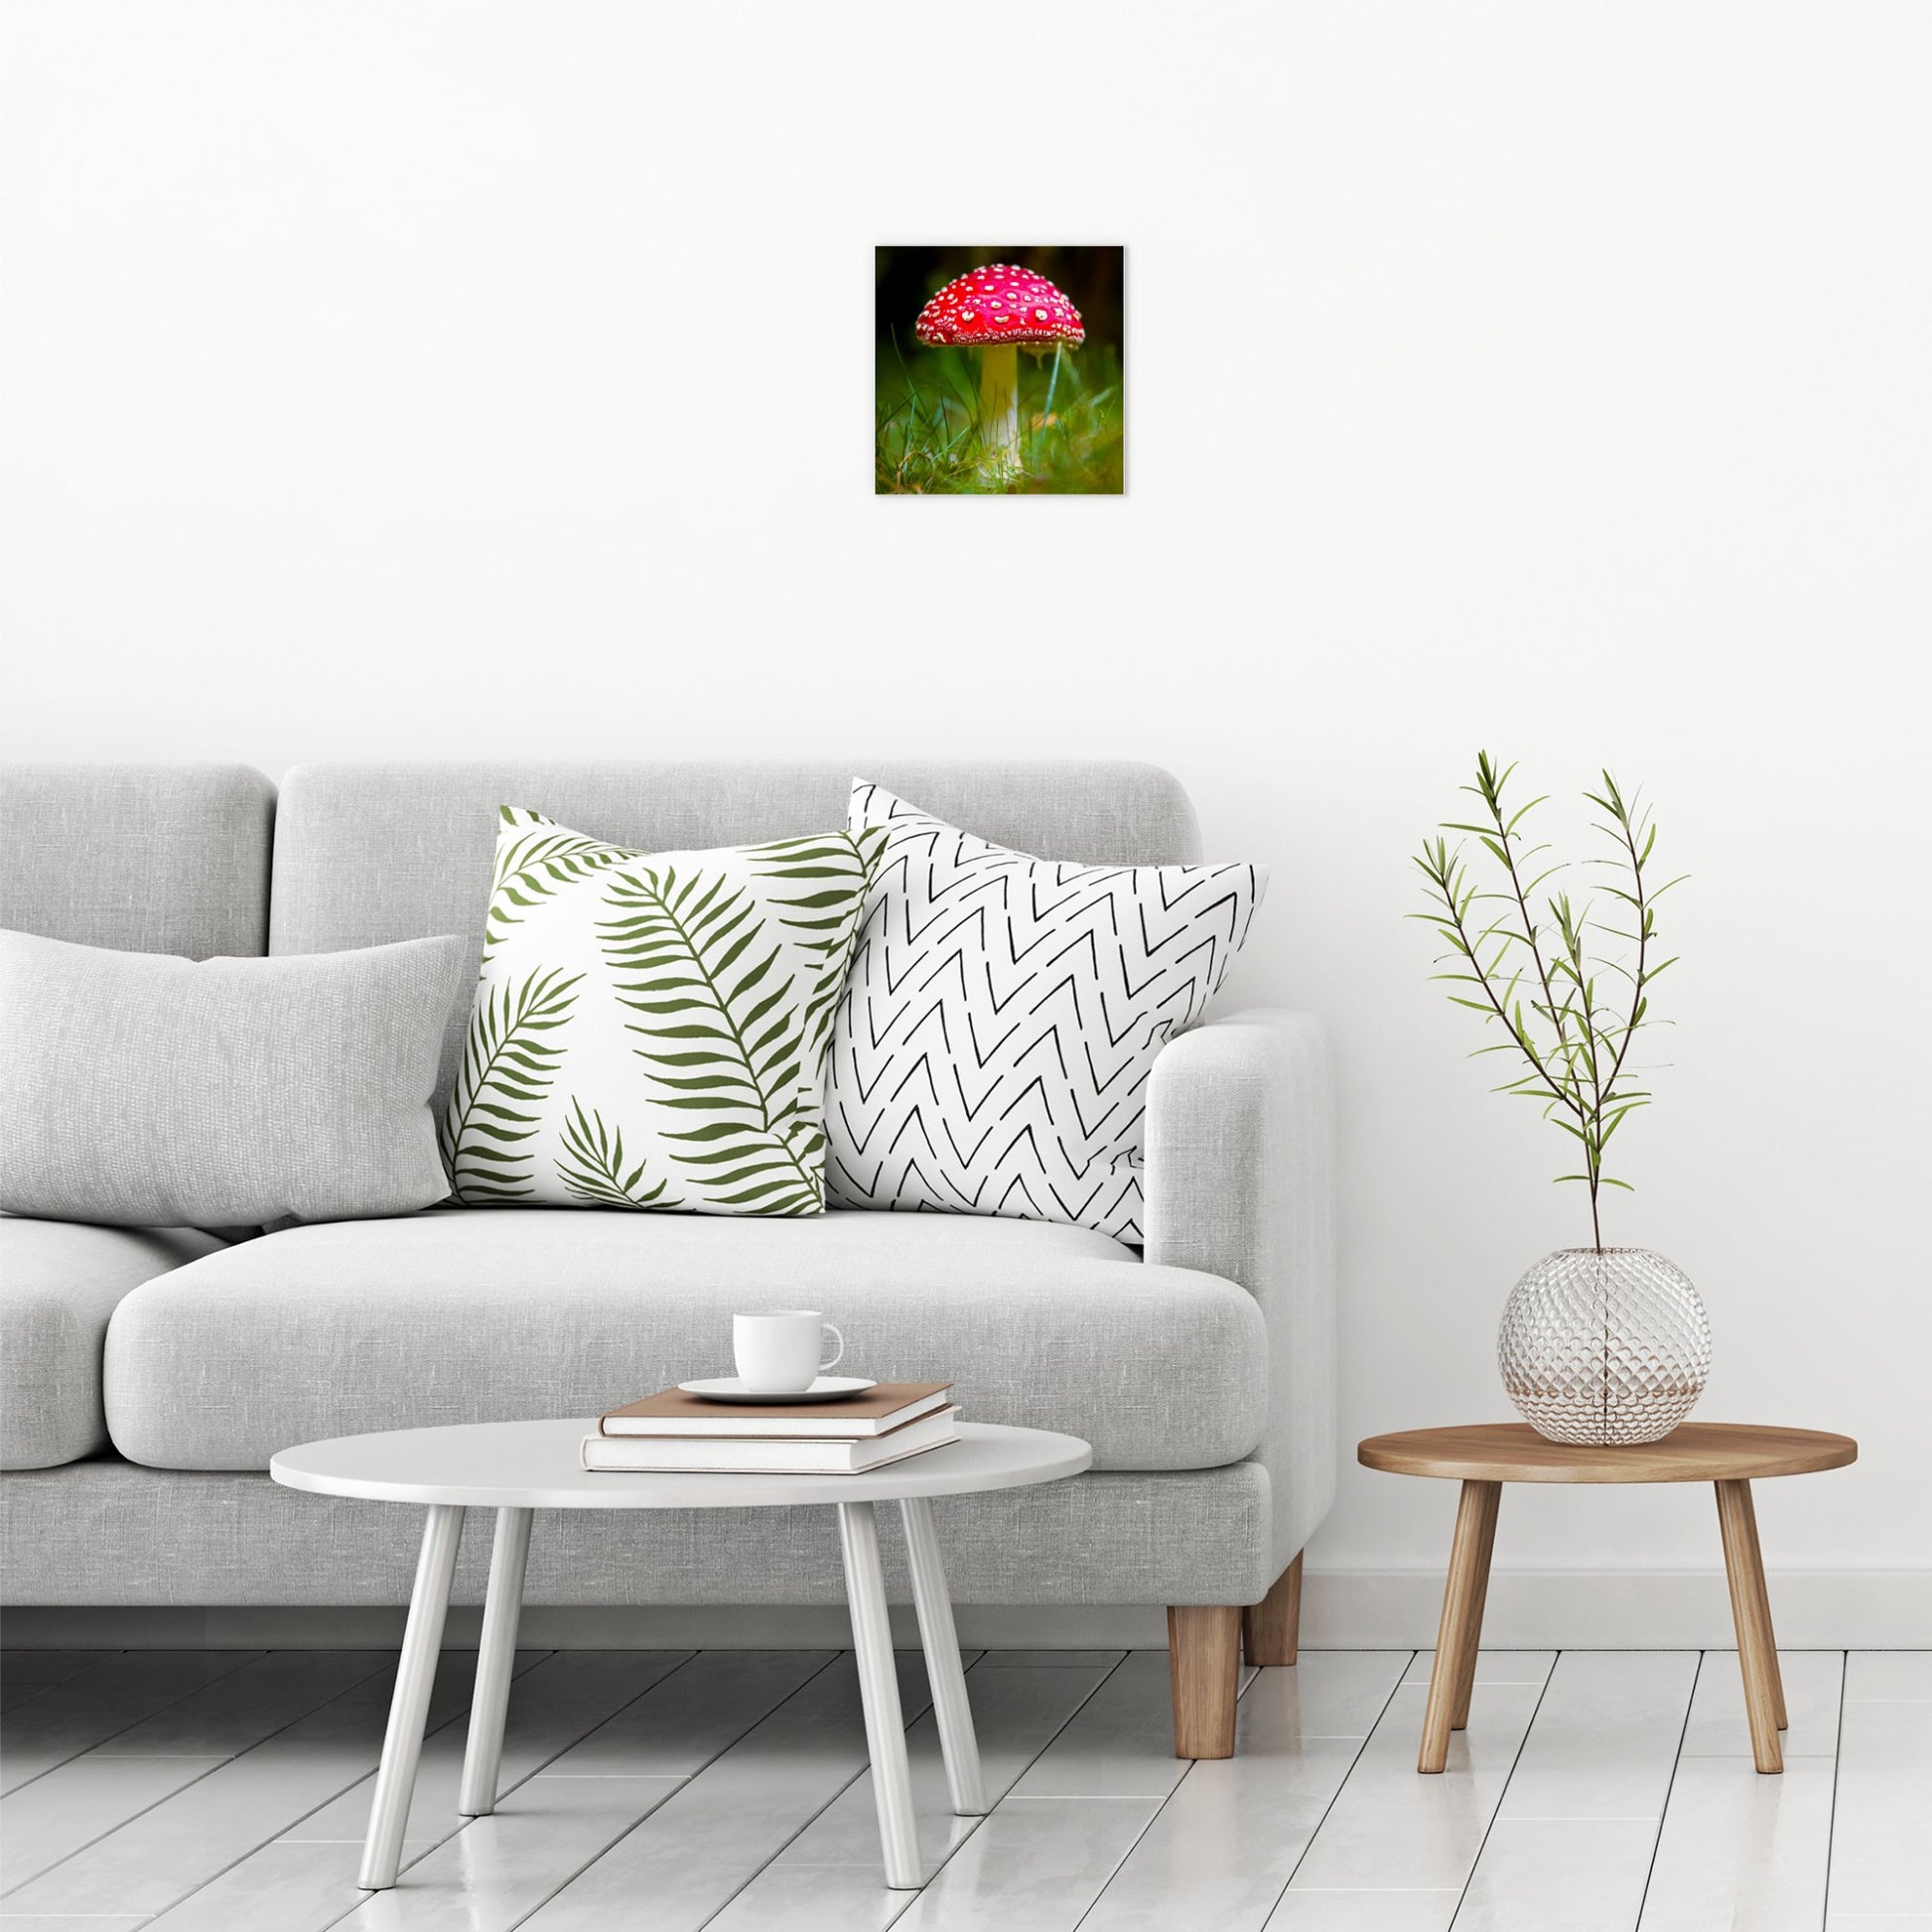 A contemporary modern room view showing a small size metal art poster display plate with printed design of a Fly Agaric (Amanita muscaria) Fungi